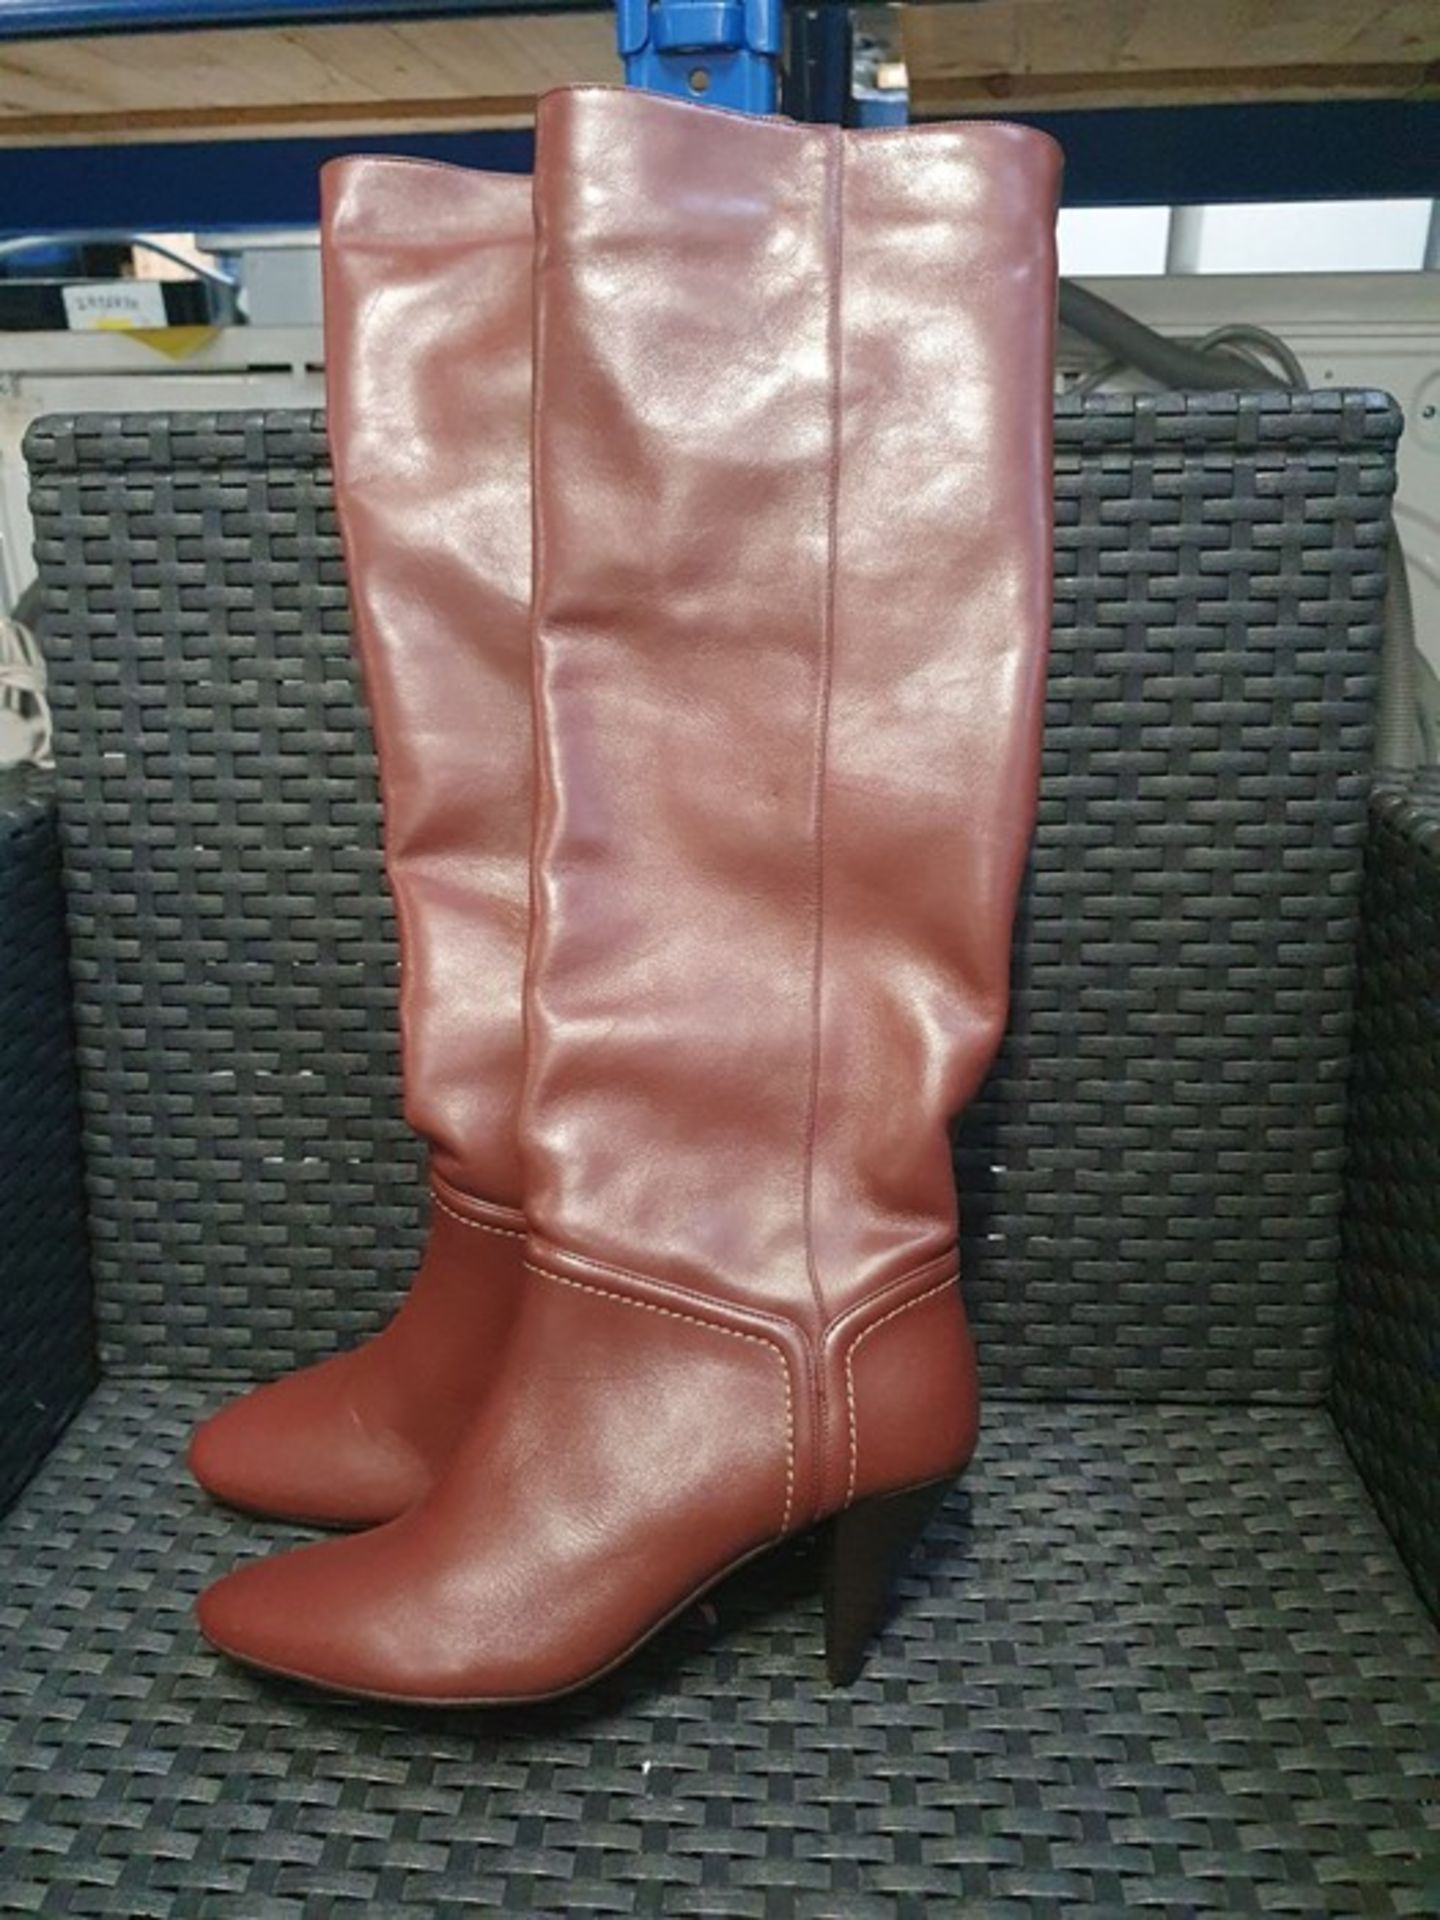 ONE PAIR OF VANESSA SEWARD LEATHER KNEE-HIGH BOOTS WITH STILETTO HEEL IN BROW - SIZE EU 38. RRP £